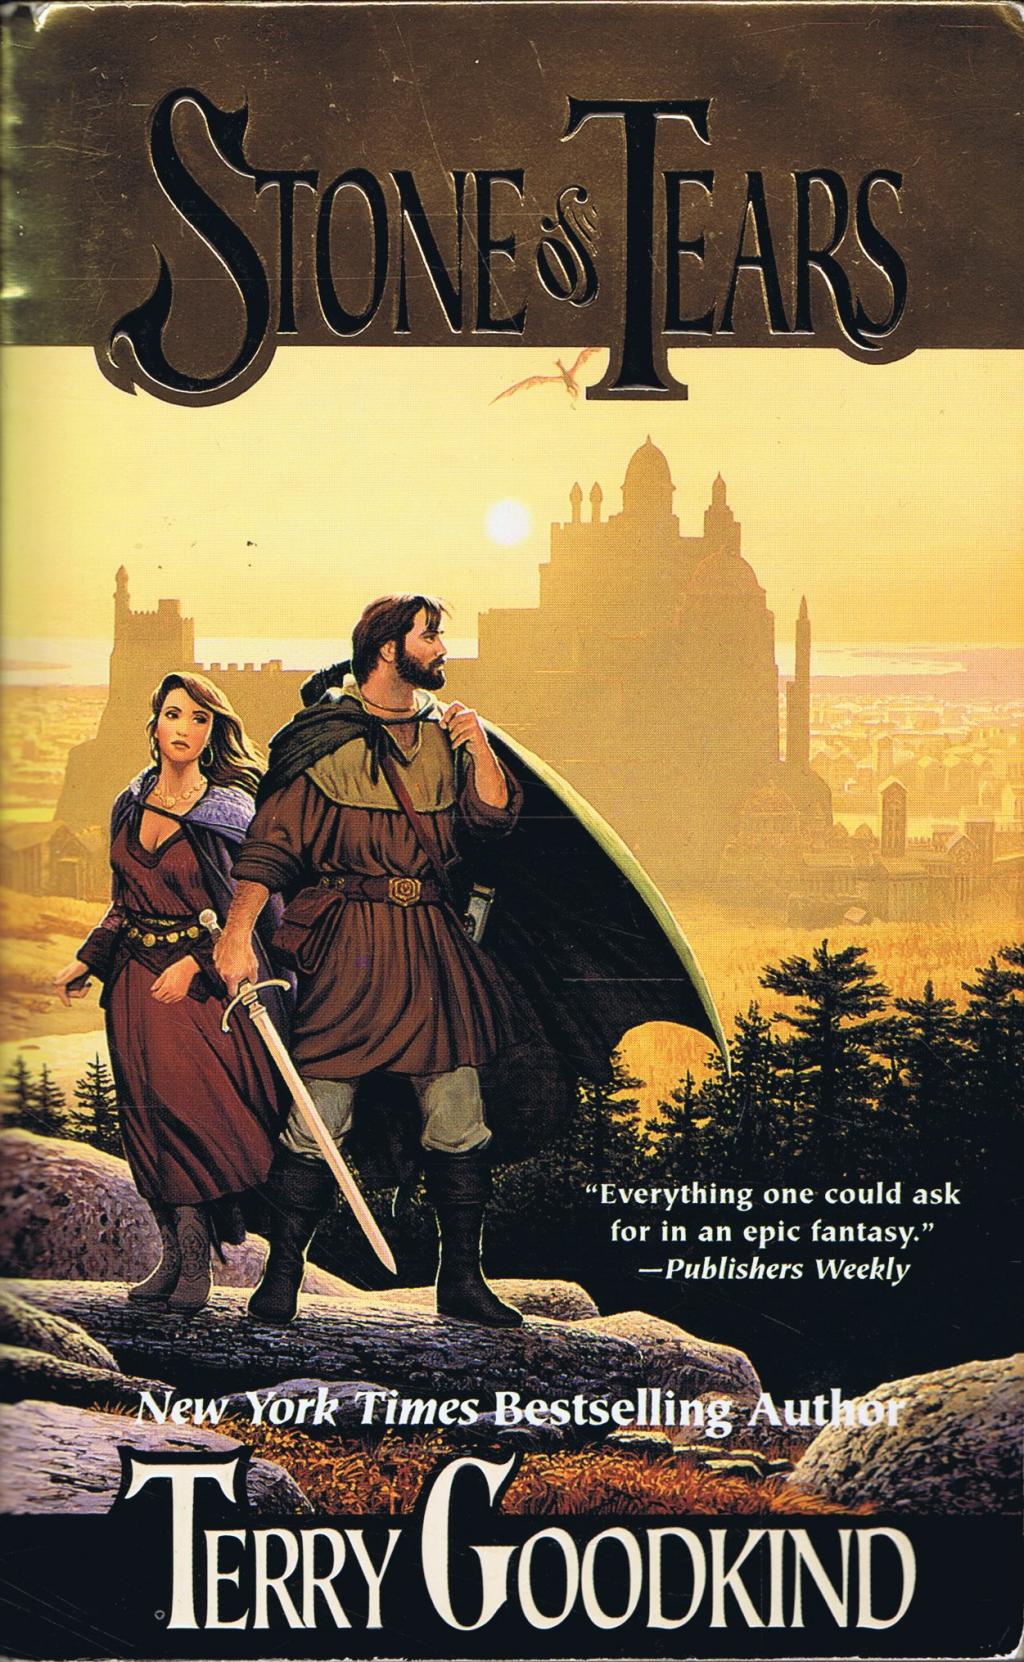 stone of tears by terry goodkind